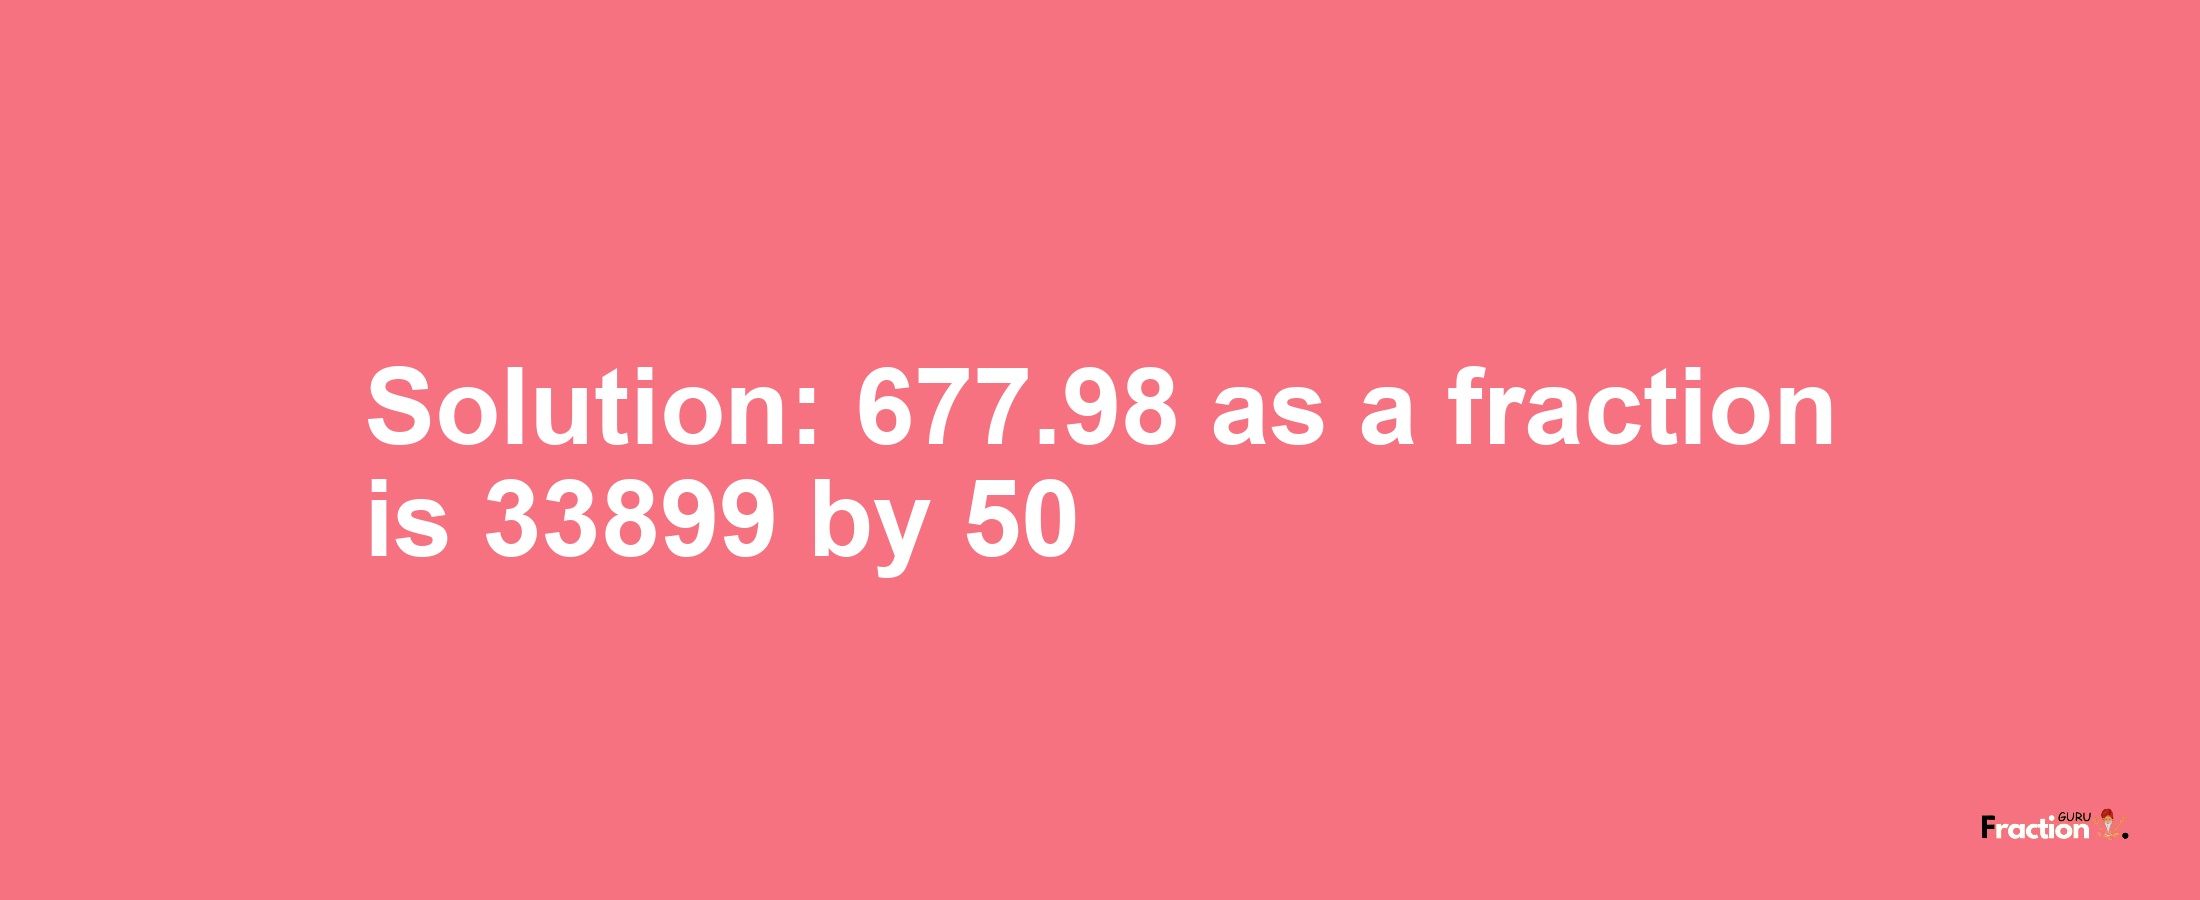 Solution:677.98 as a fraction is 33899/50